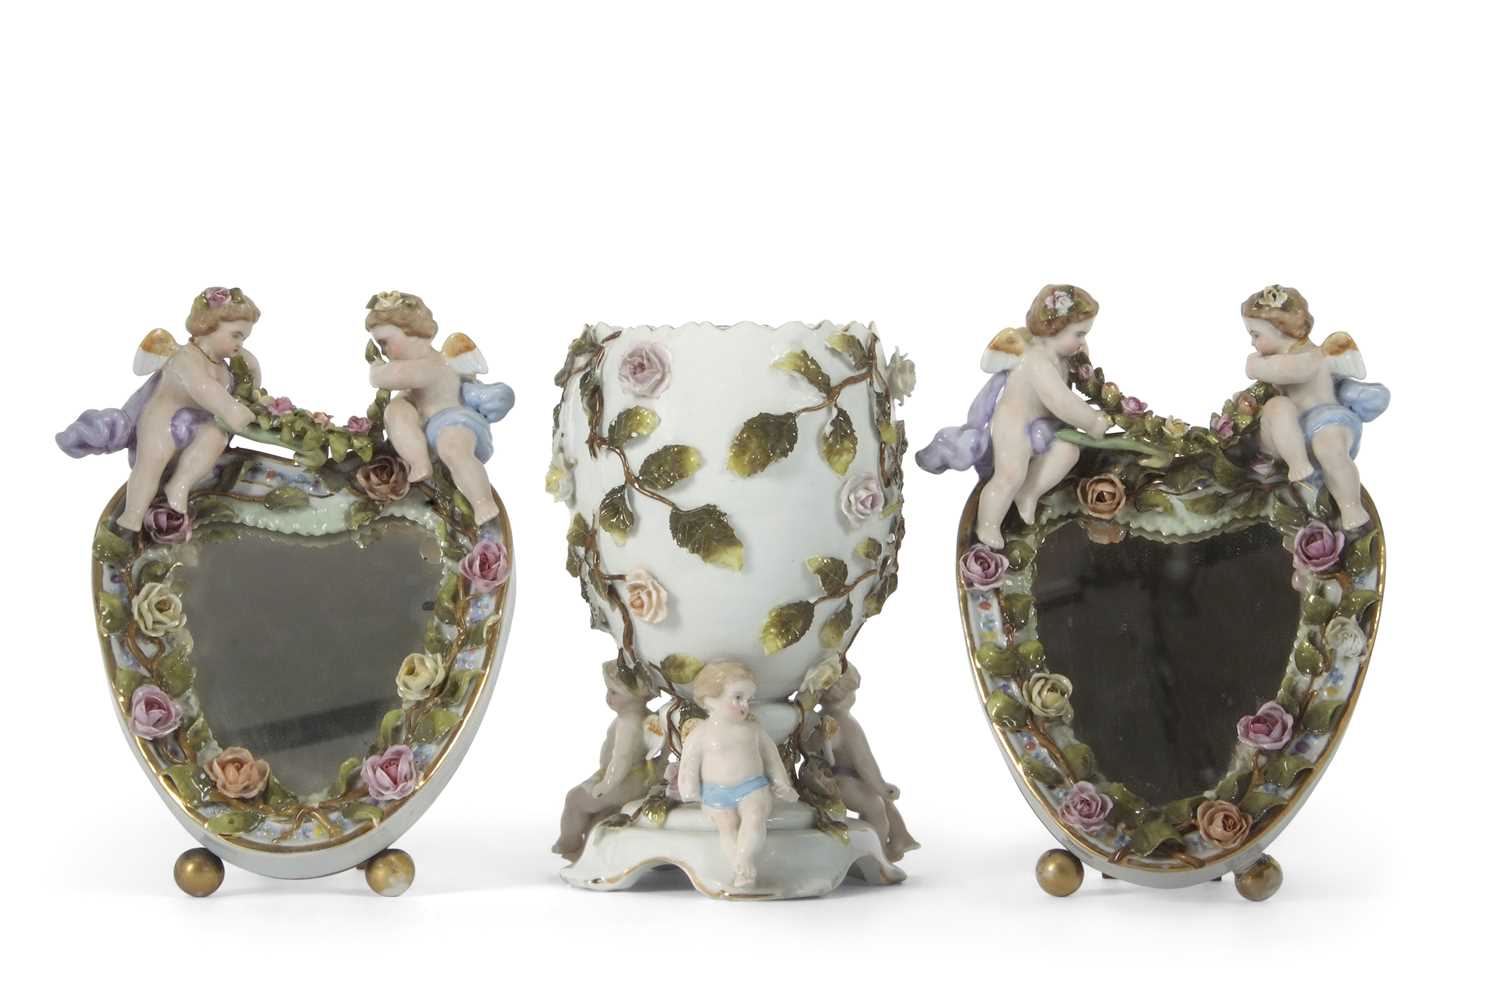 A Continental porcelain vase of oval shaped, supported by three cherubs, the base with Sitzendorf